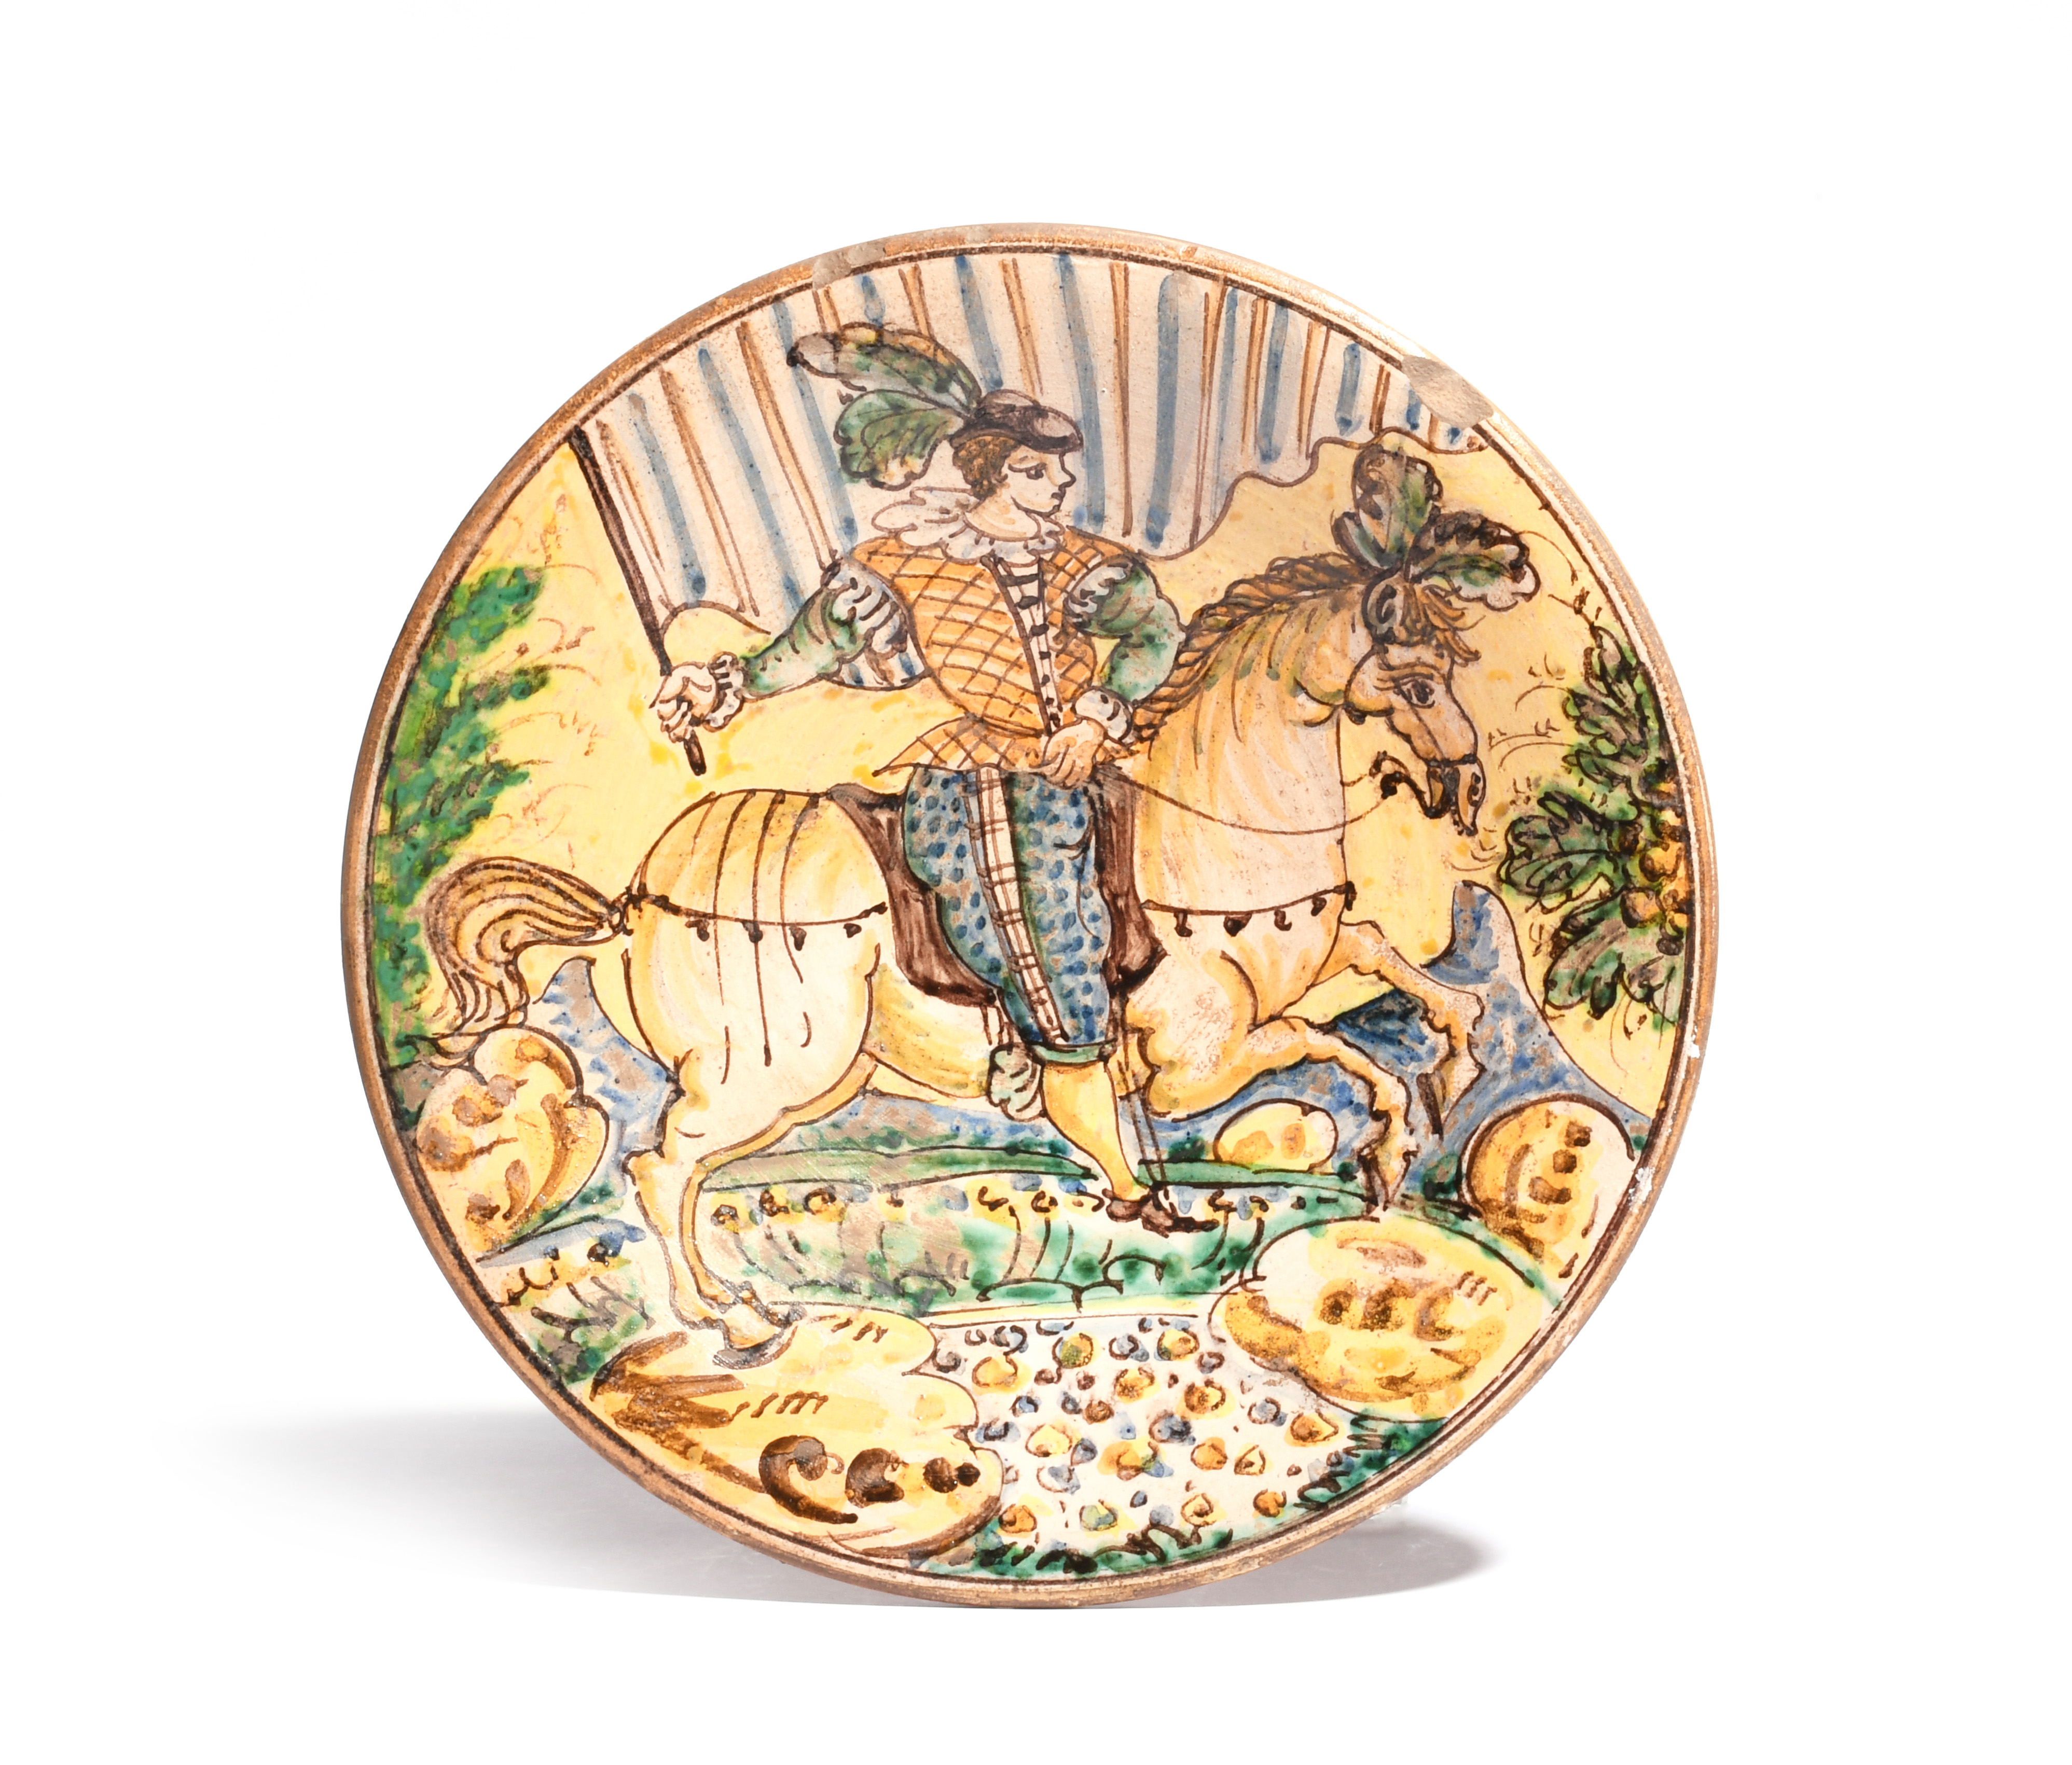 A Montelupo charger late 17th century, painted with an equestrian portrait of a figure riding a